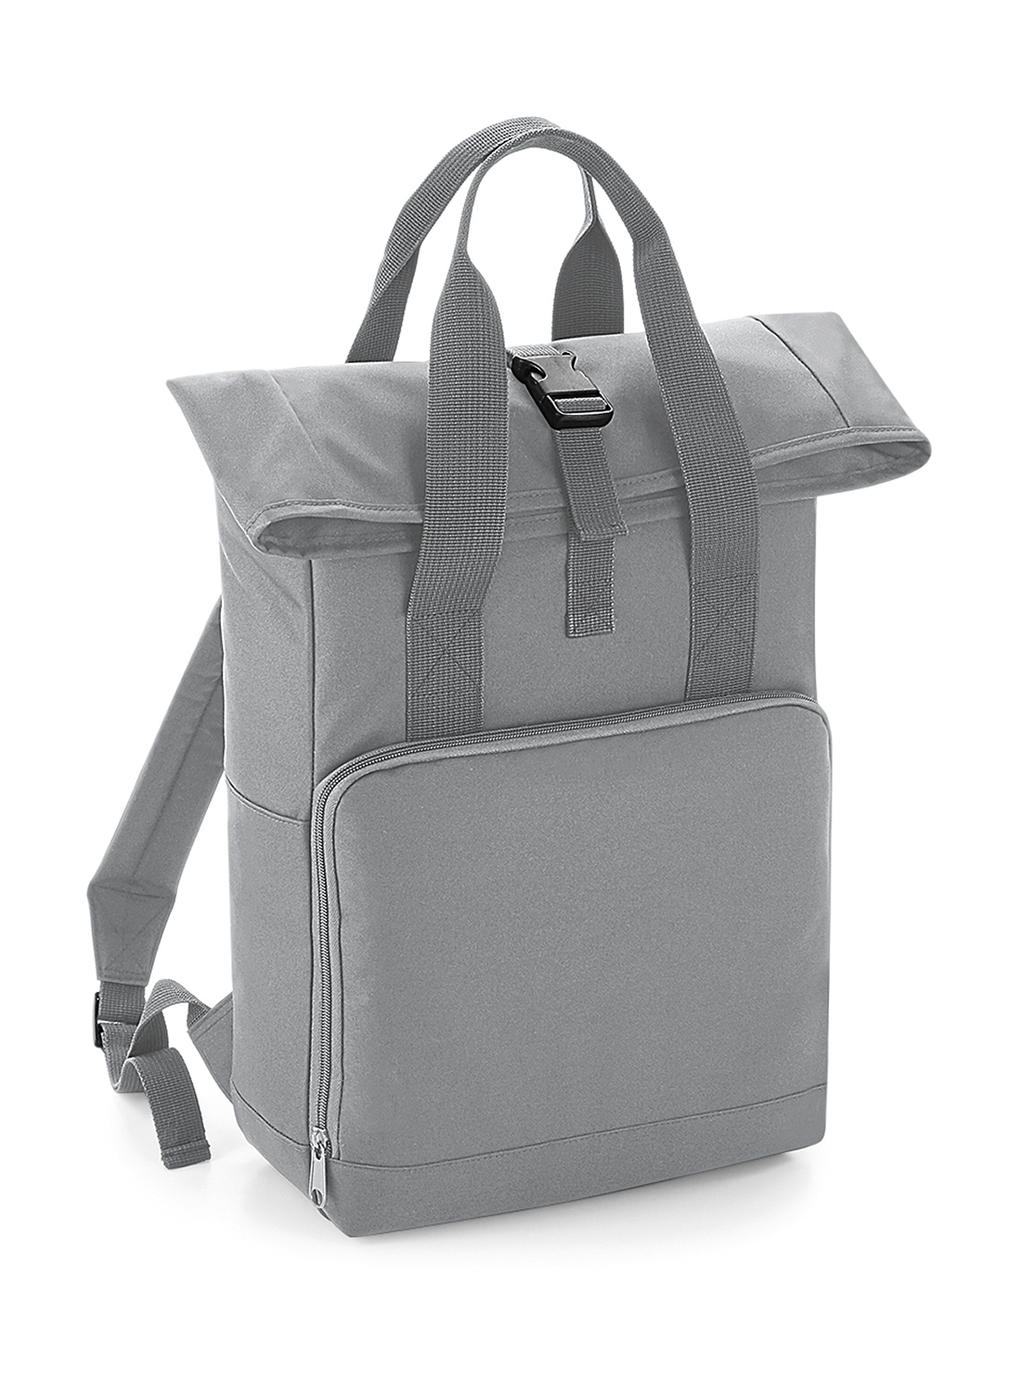  Twin Handle Roll-Top Backpack in Farbe Light Grey